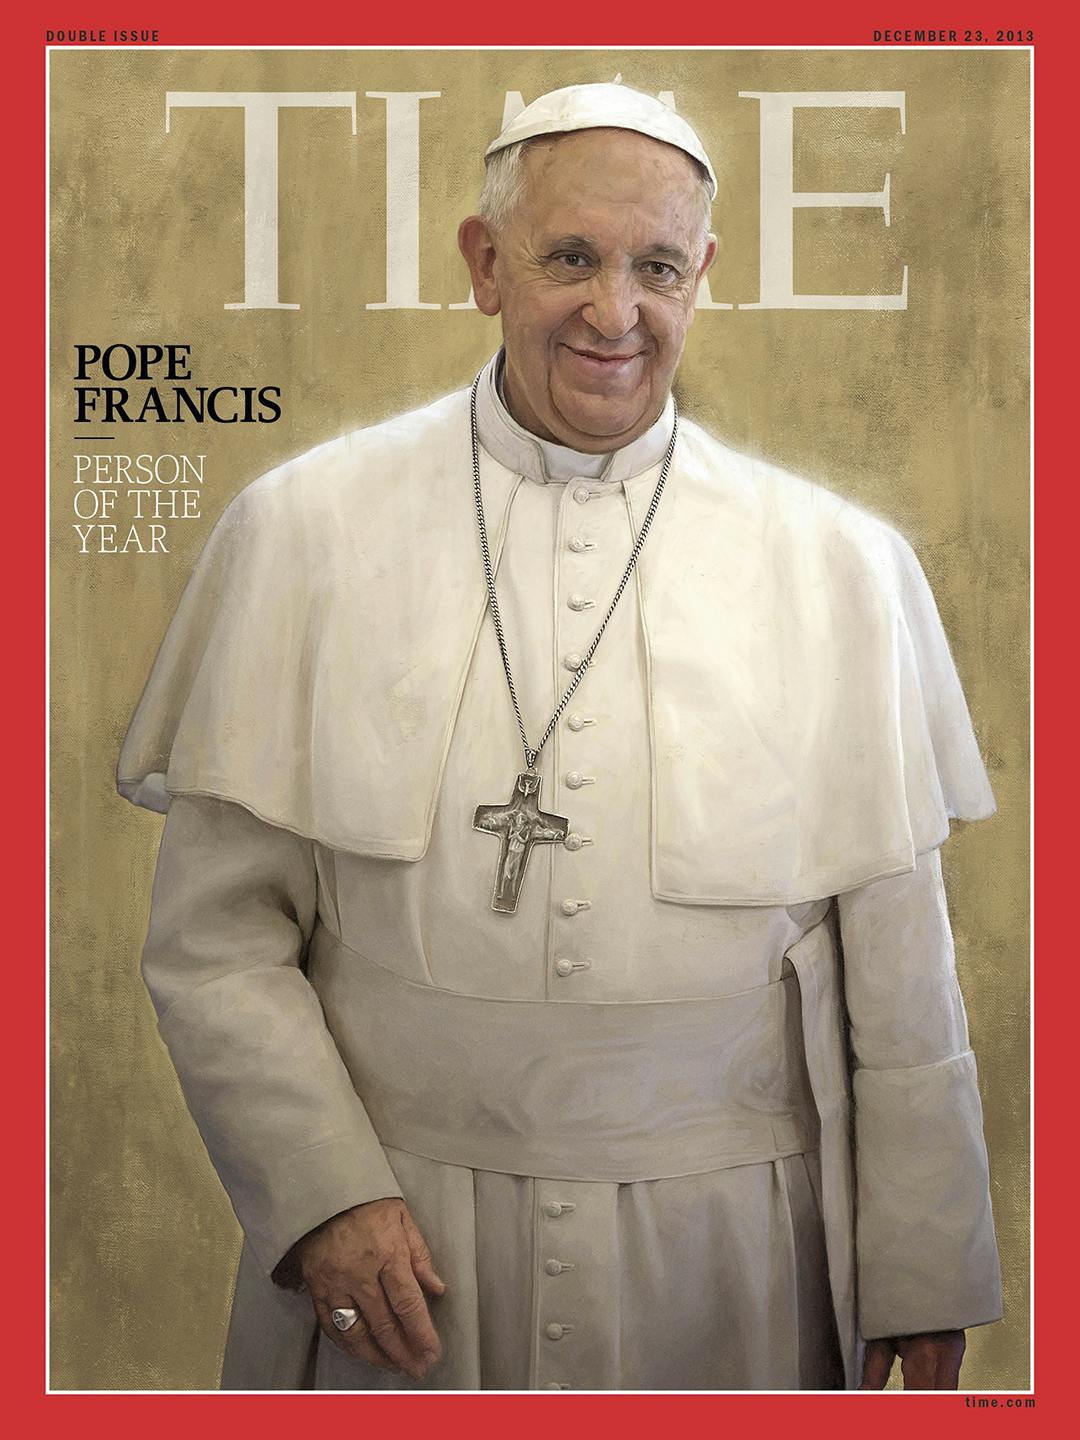 A portrait of the pope